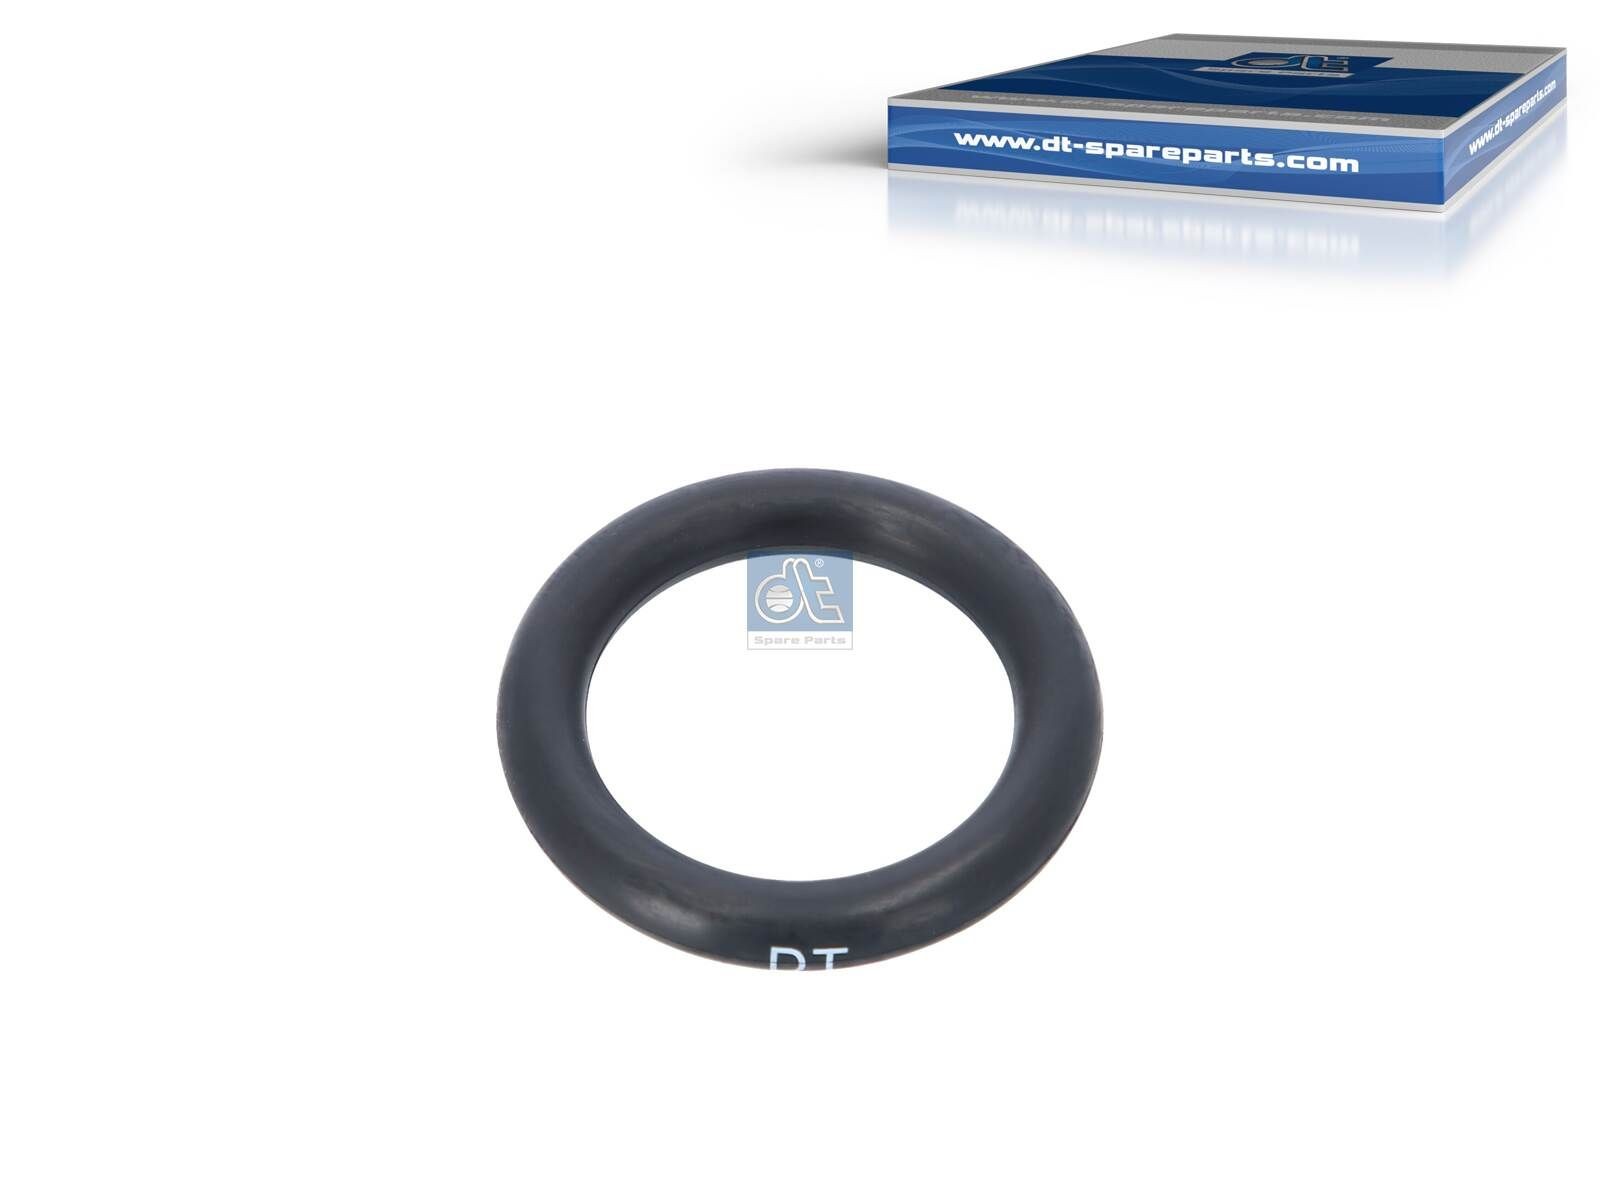 DT Spare Parts 31 x 6,5 mm, O-ring, NBR (Nitril-Butadien-Kautschuk) O-ring 1.24251 kopen